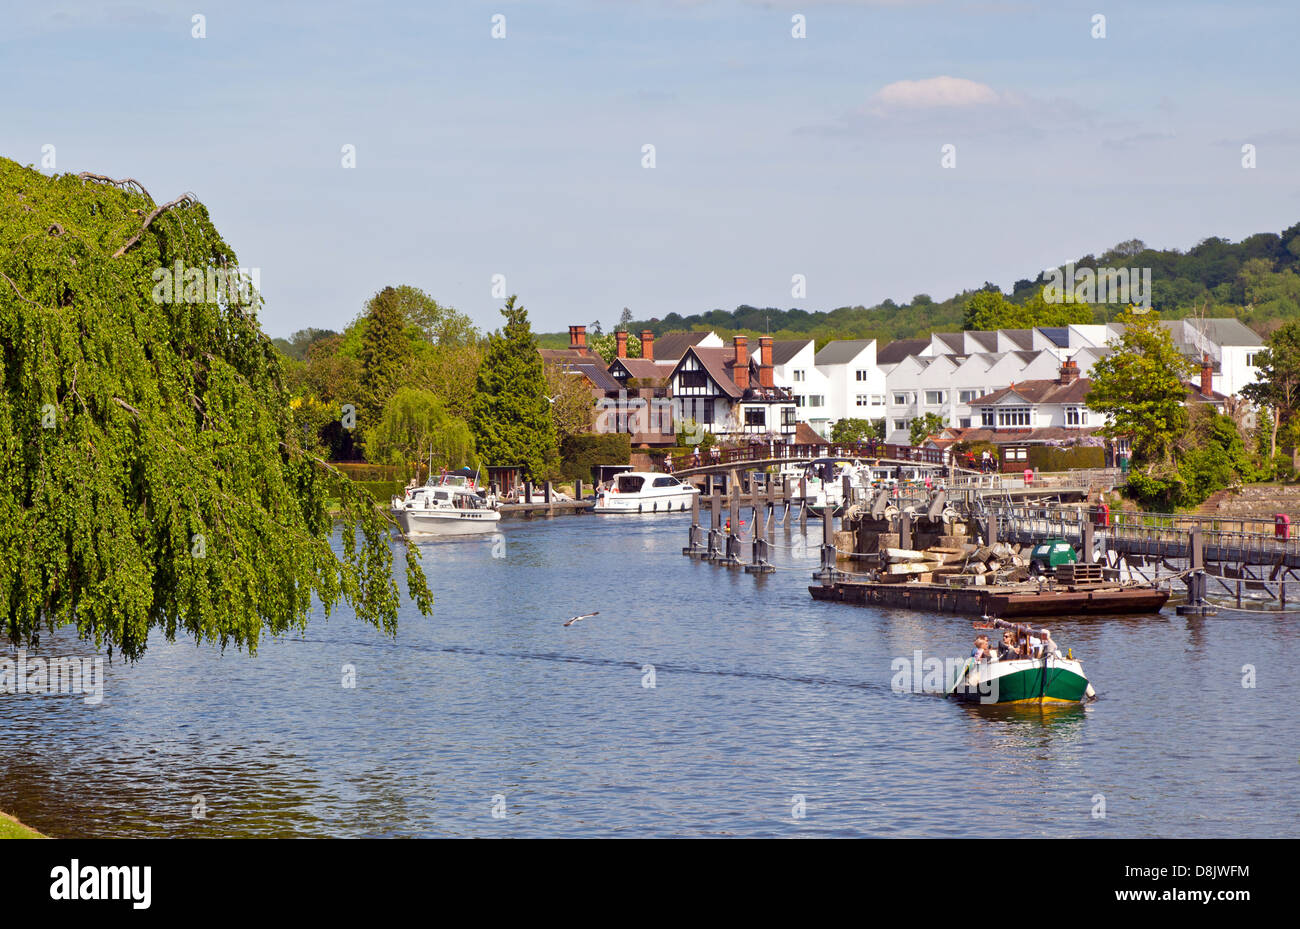 Boating On The River Thames Marlow UK Stock Photo